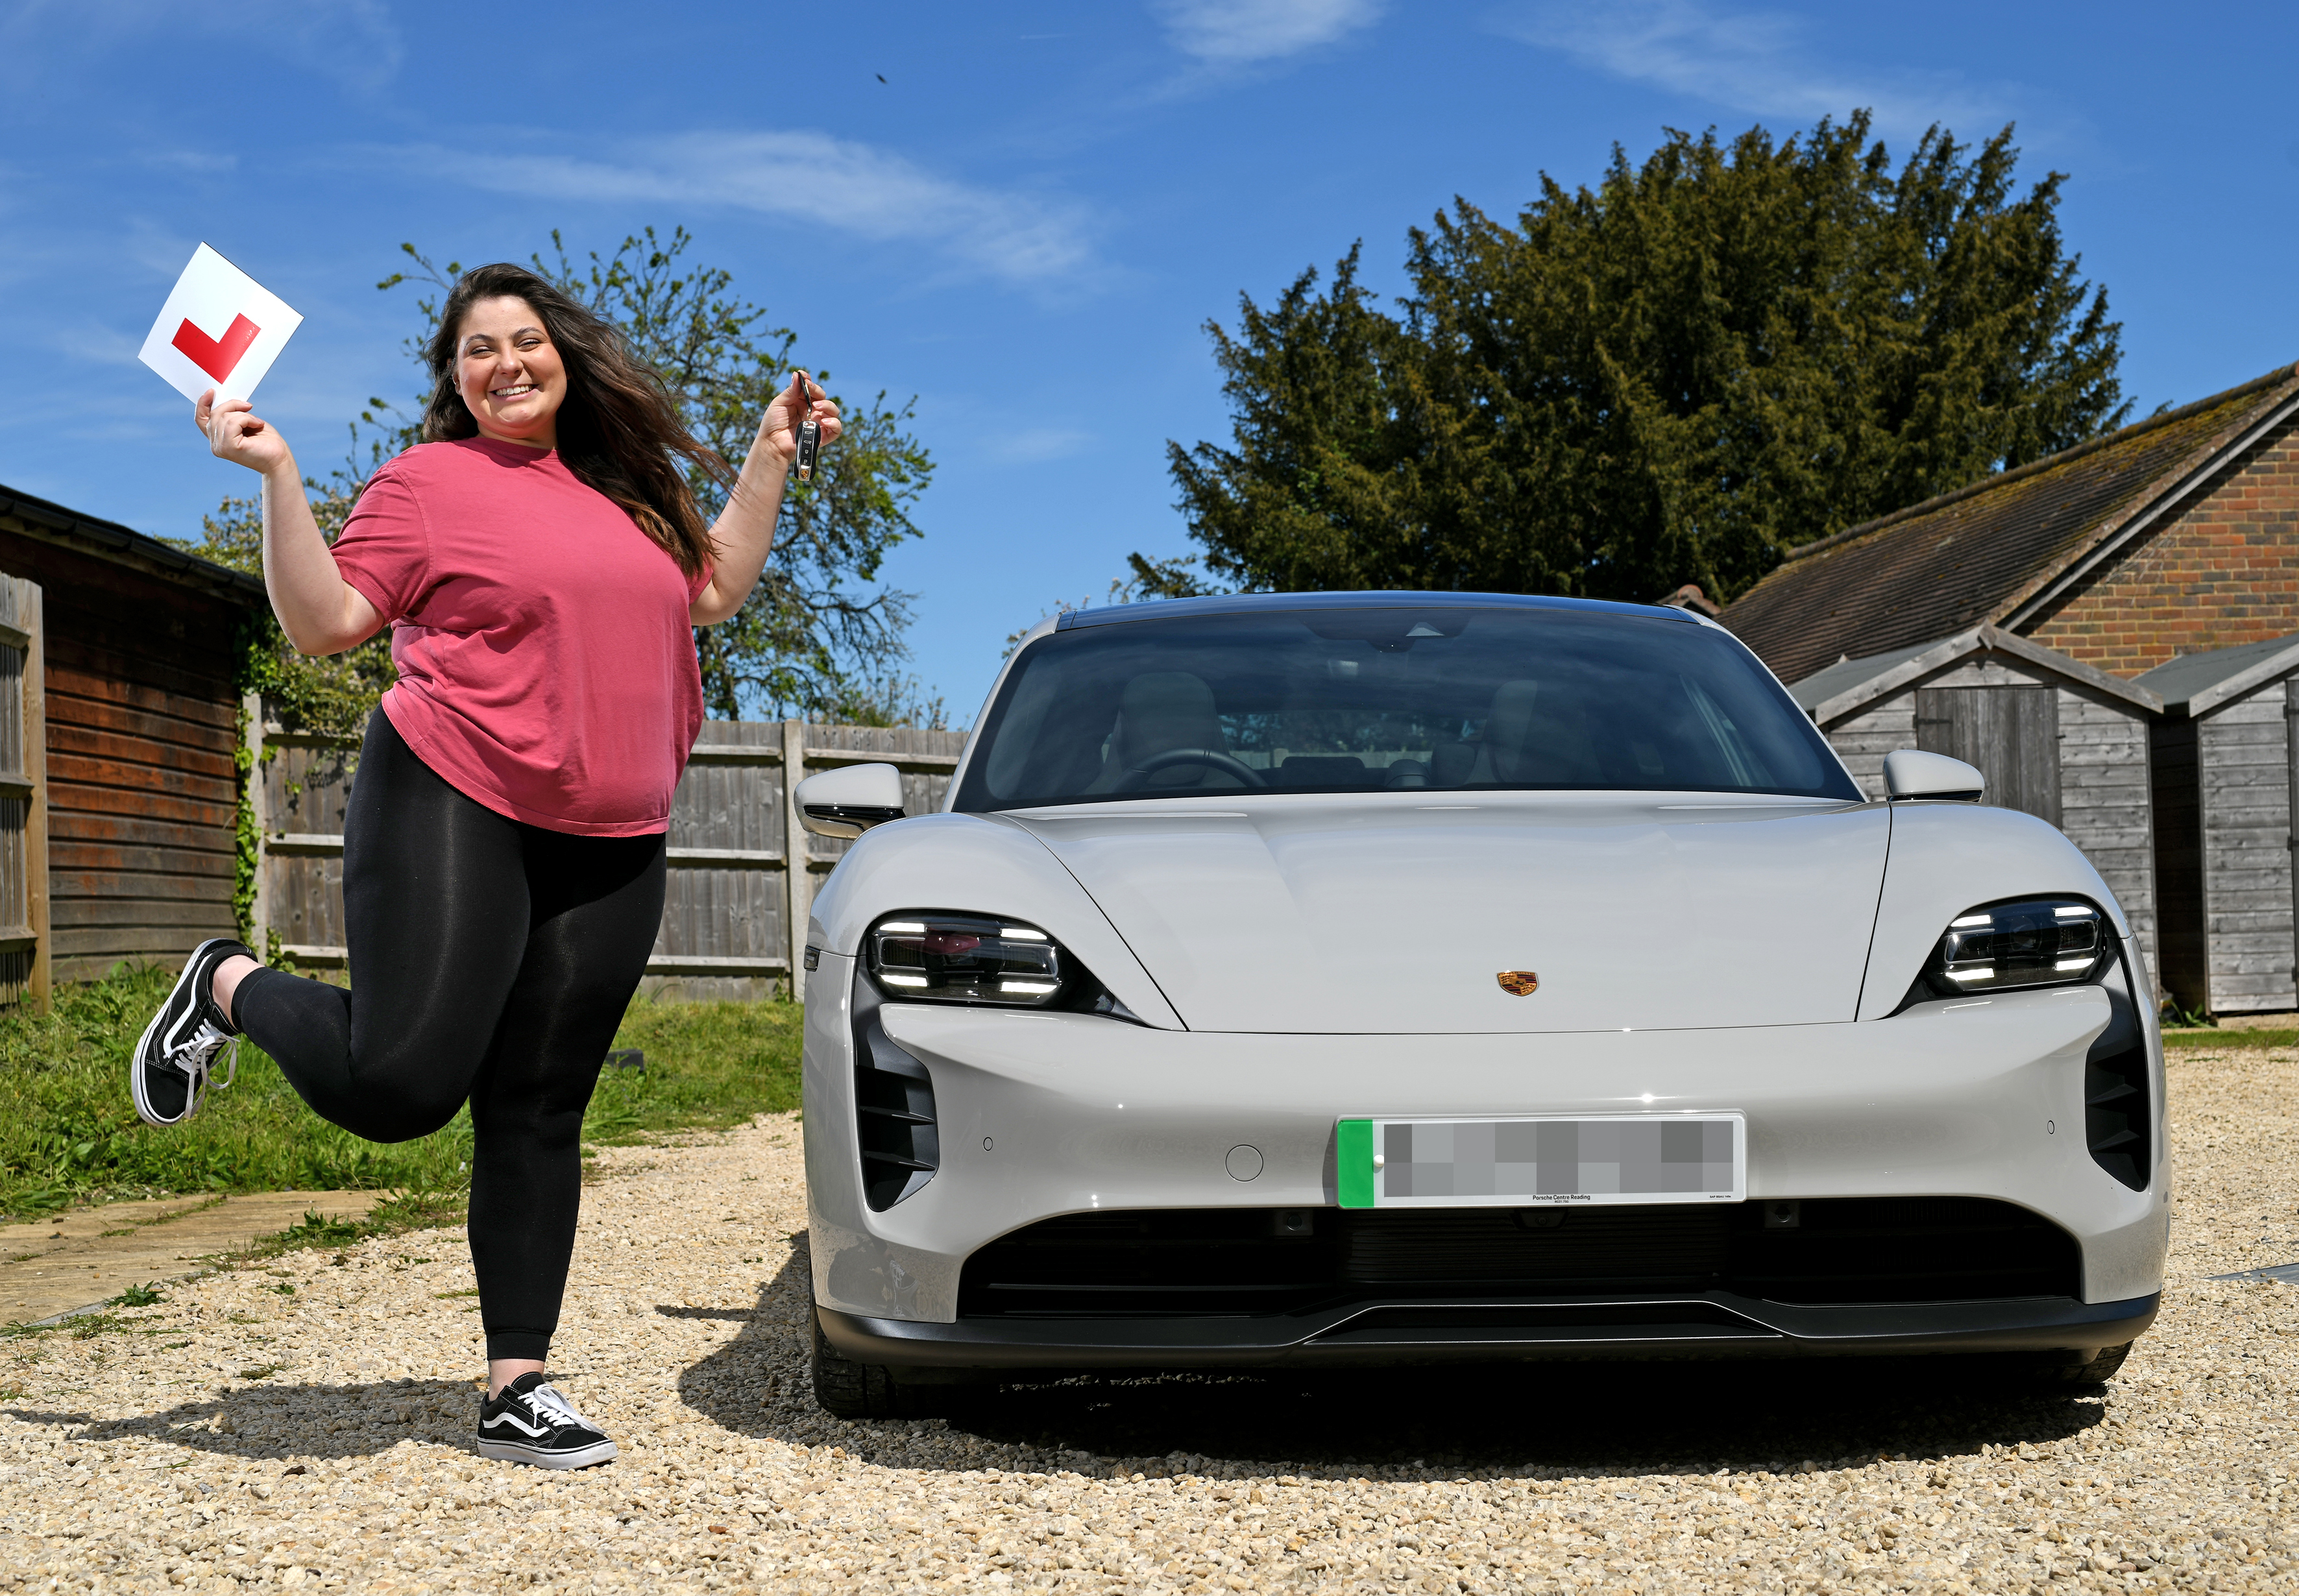 The lucky winner says she never expected her first car to be a Porsche